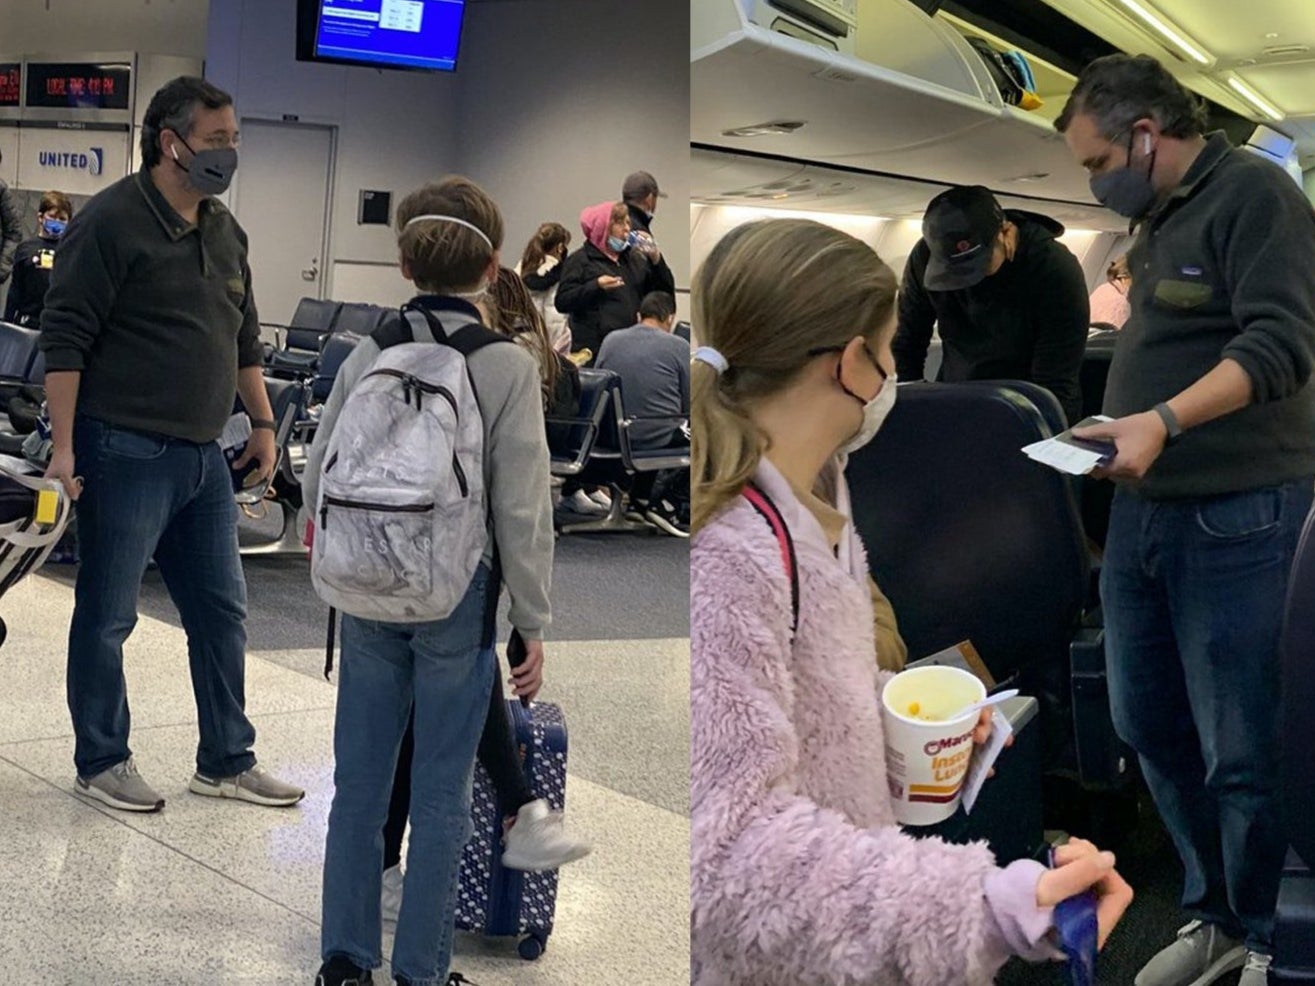 Viral photographs appeared to show Senator Ted Cruz (R-TX) traveling to Cancun, Mexico as his home state of Texas faced a historic winter storm.